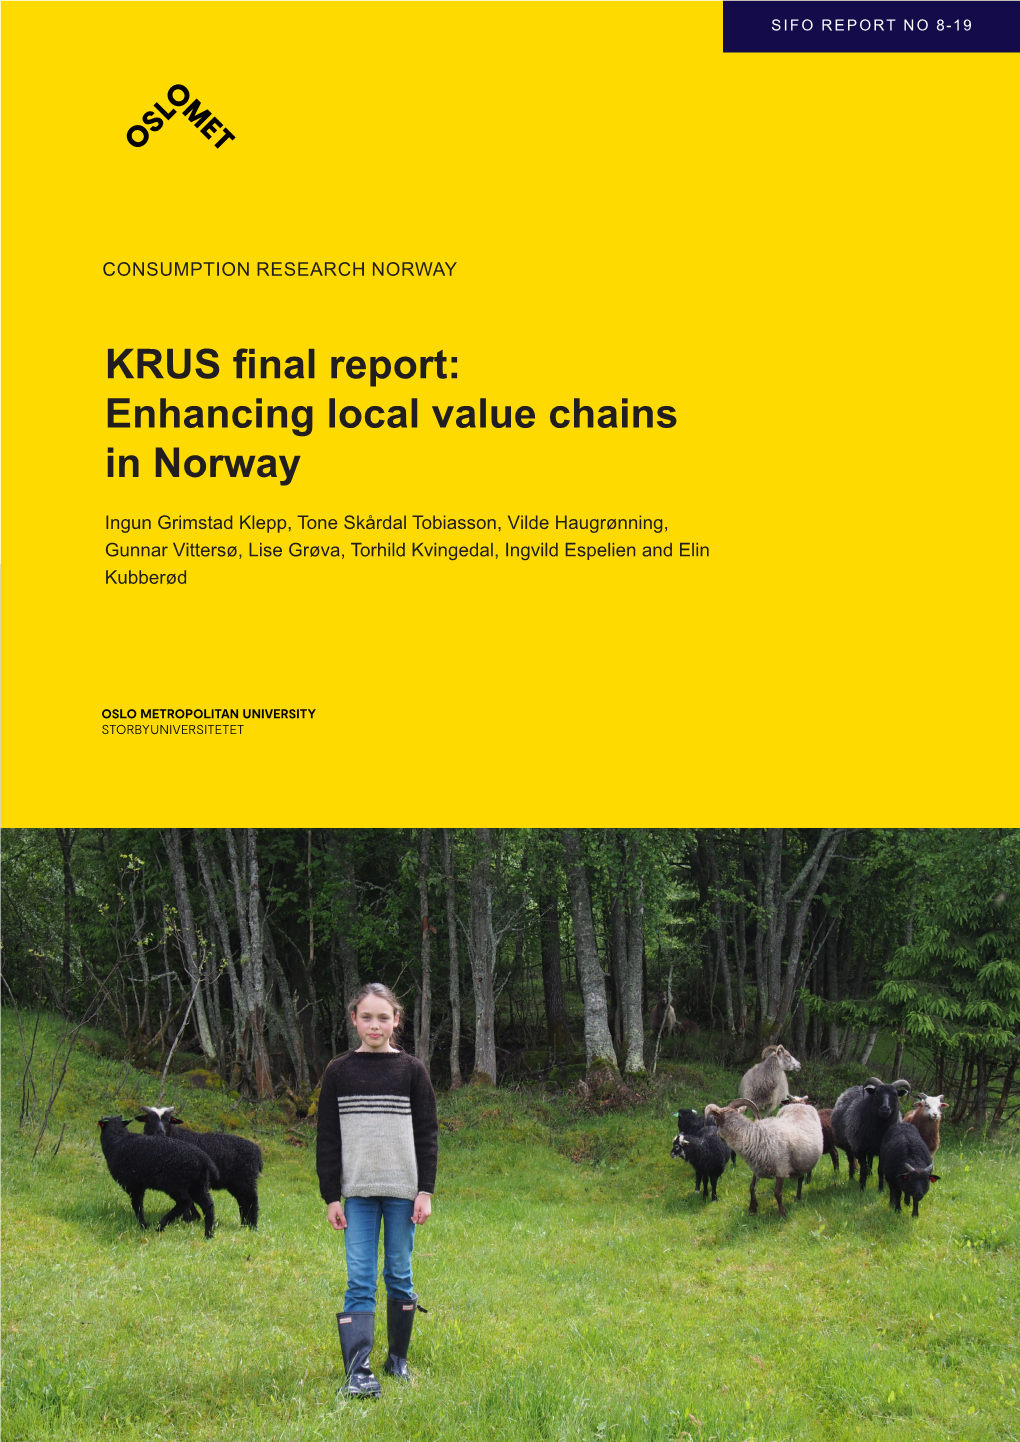 KRUS Final Report: Enhancing Local Value Chains in Norway